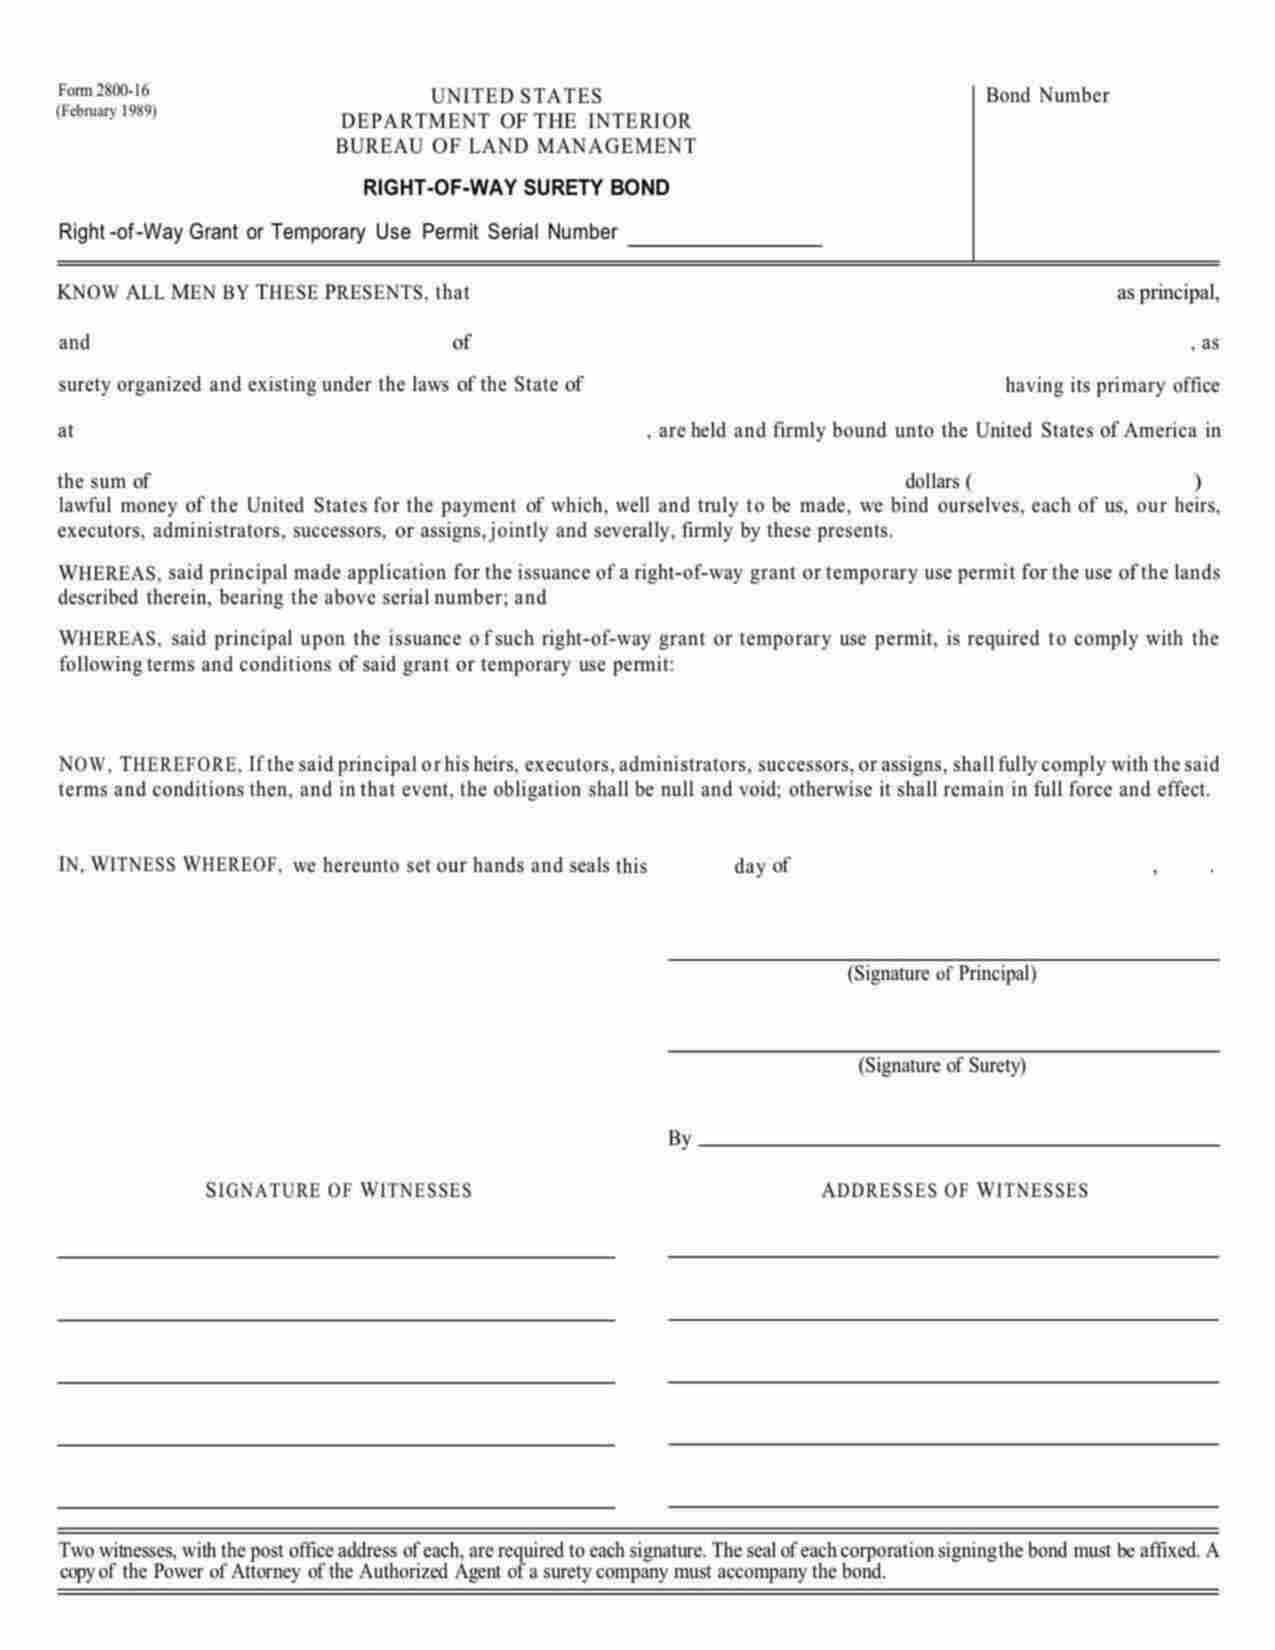 Federal Right-of-Way Grant or Temporary Use Permit Bond Form